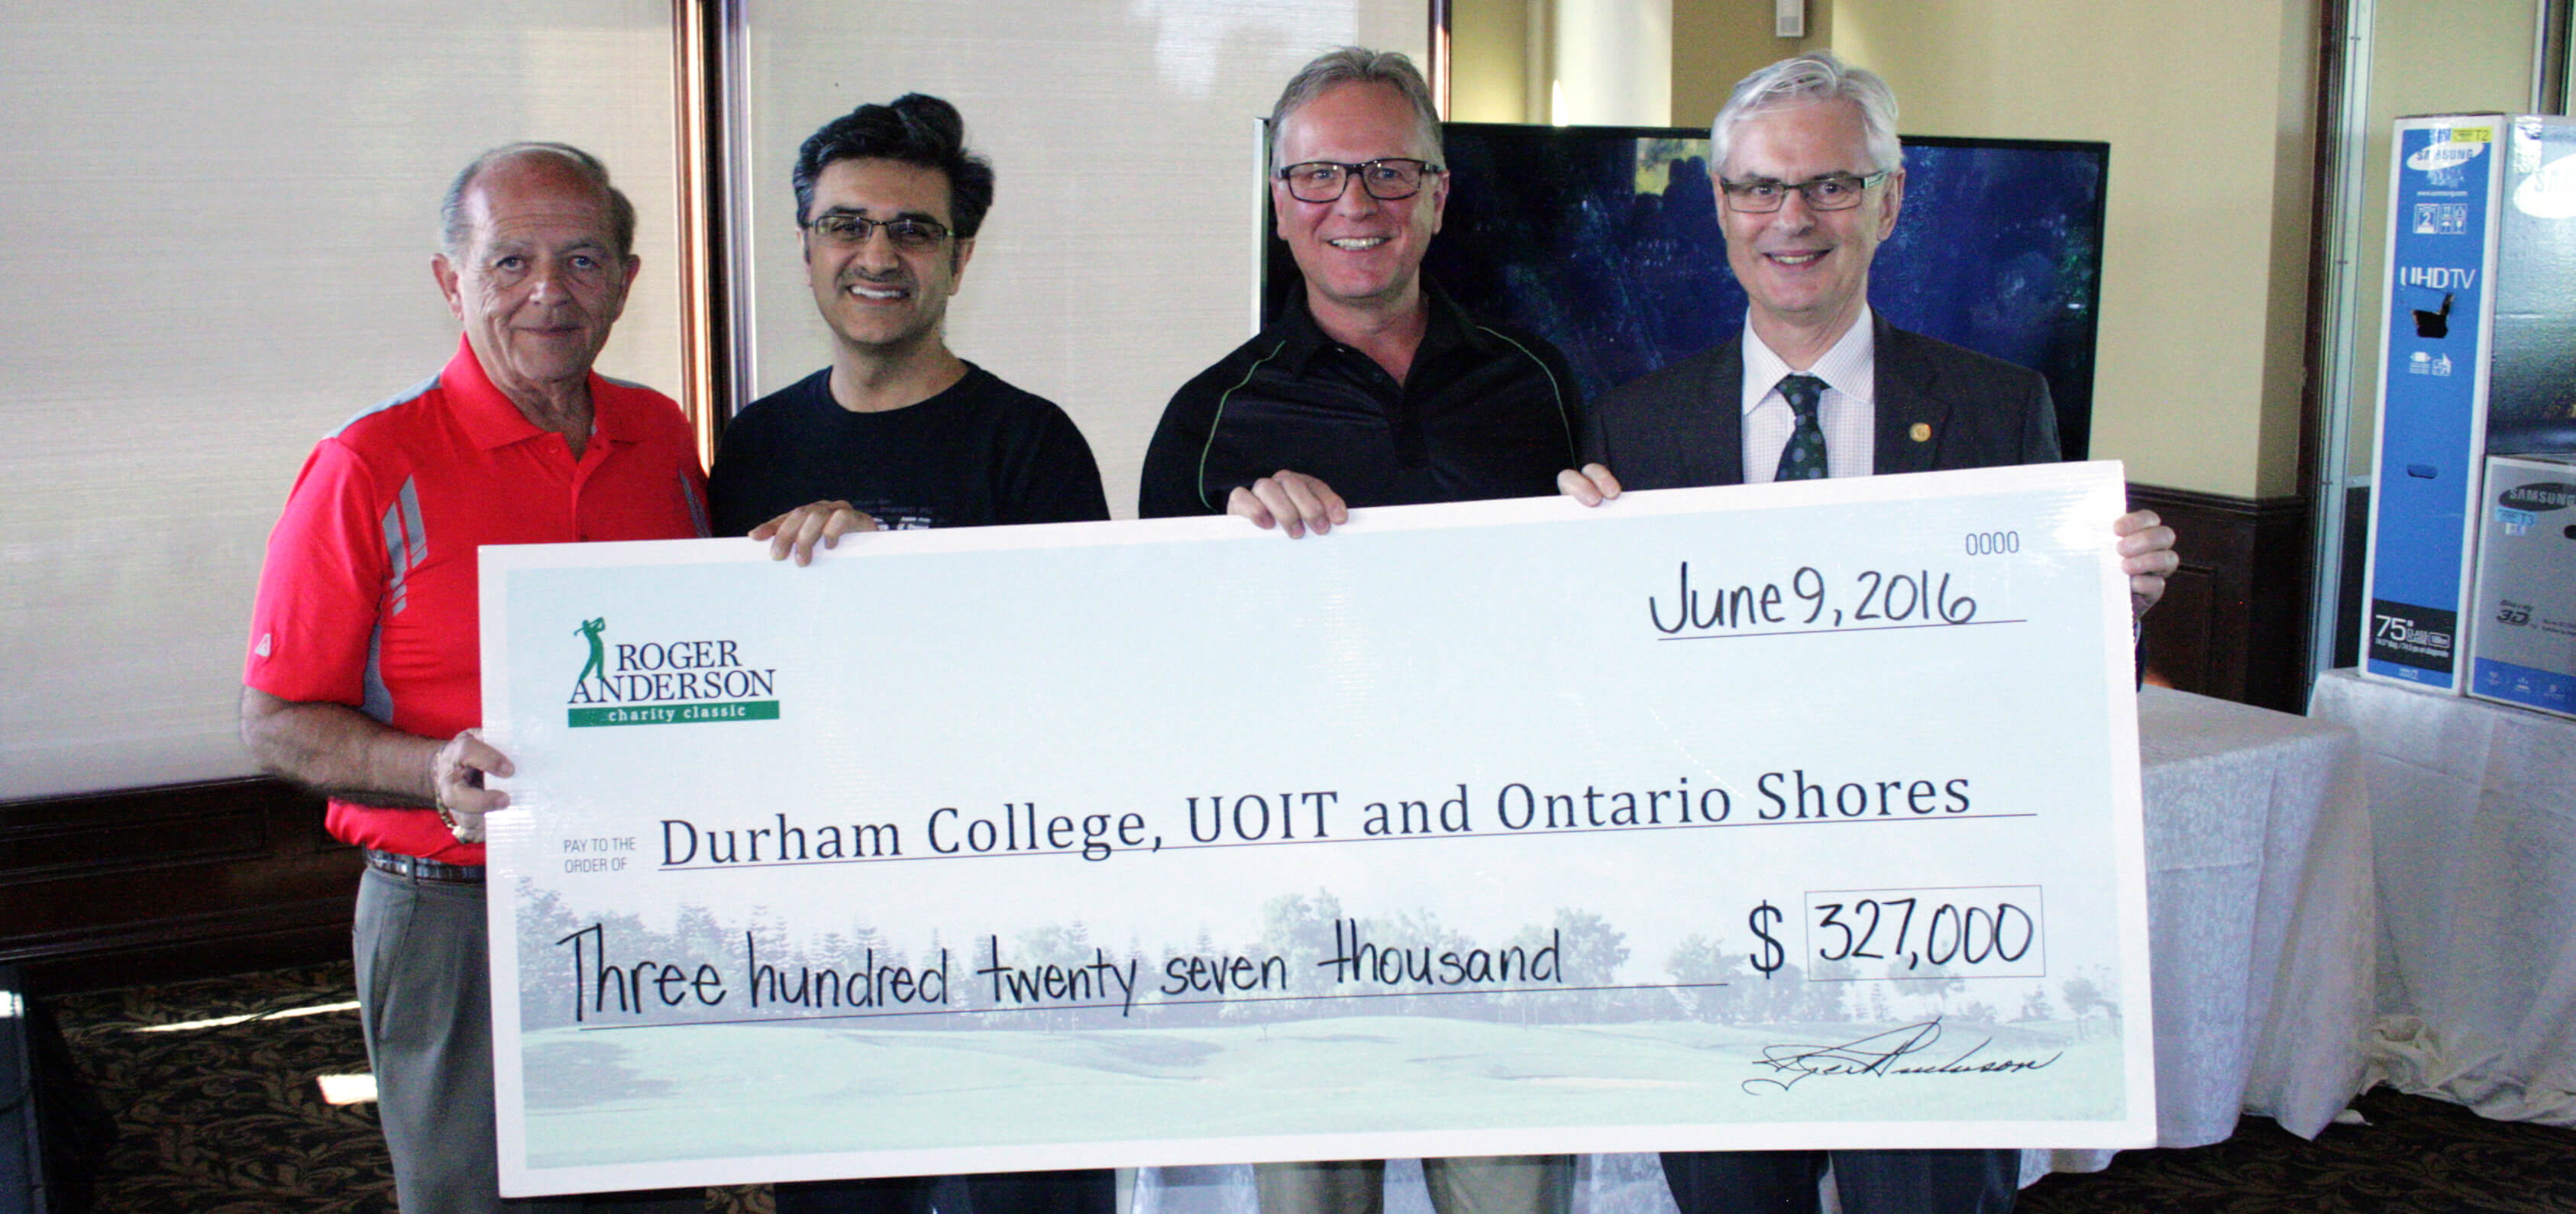 Roger Anderson Charity Classic raises $327,000 for DC, UOIT and Ontario Shores